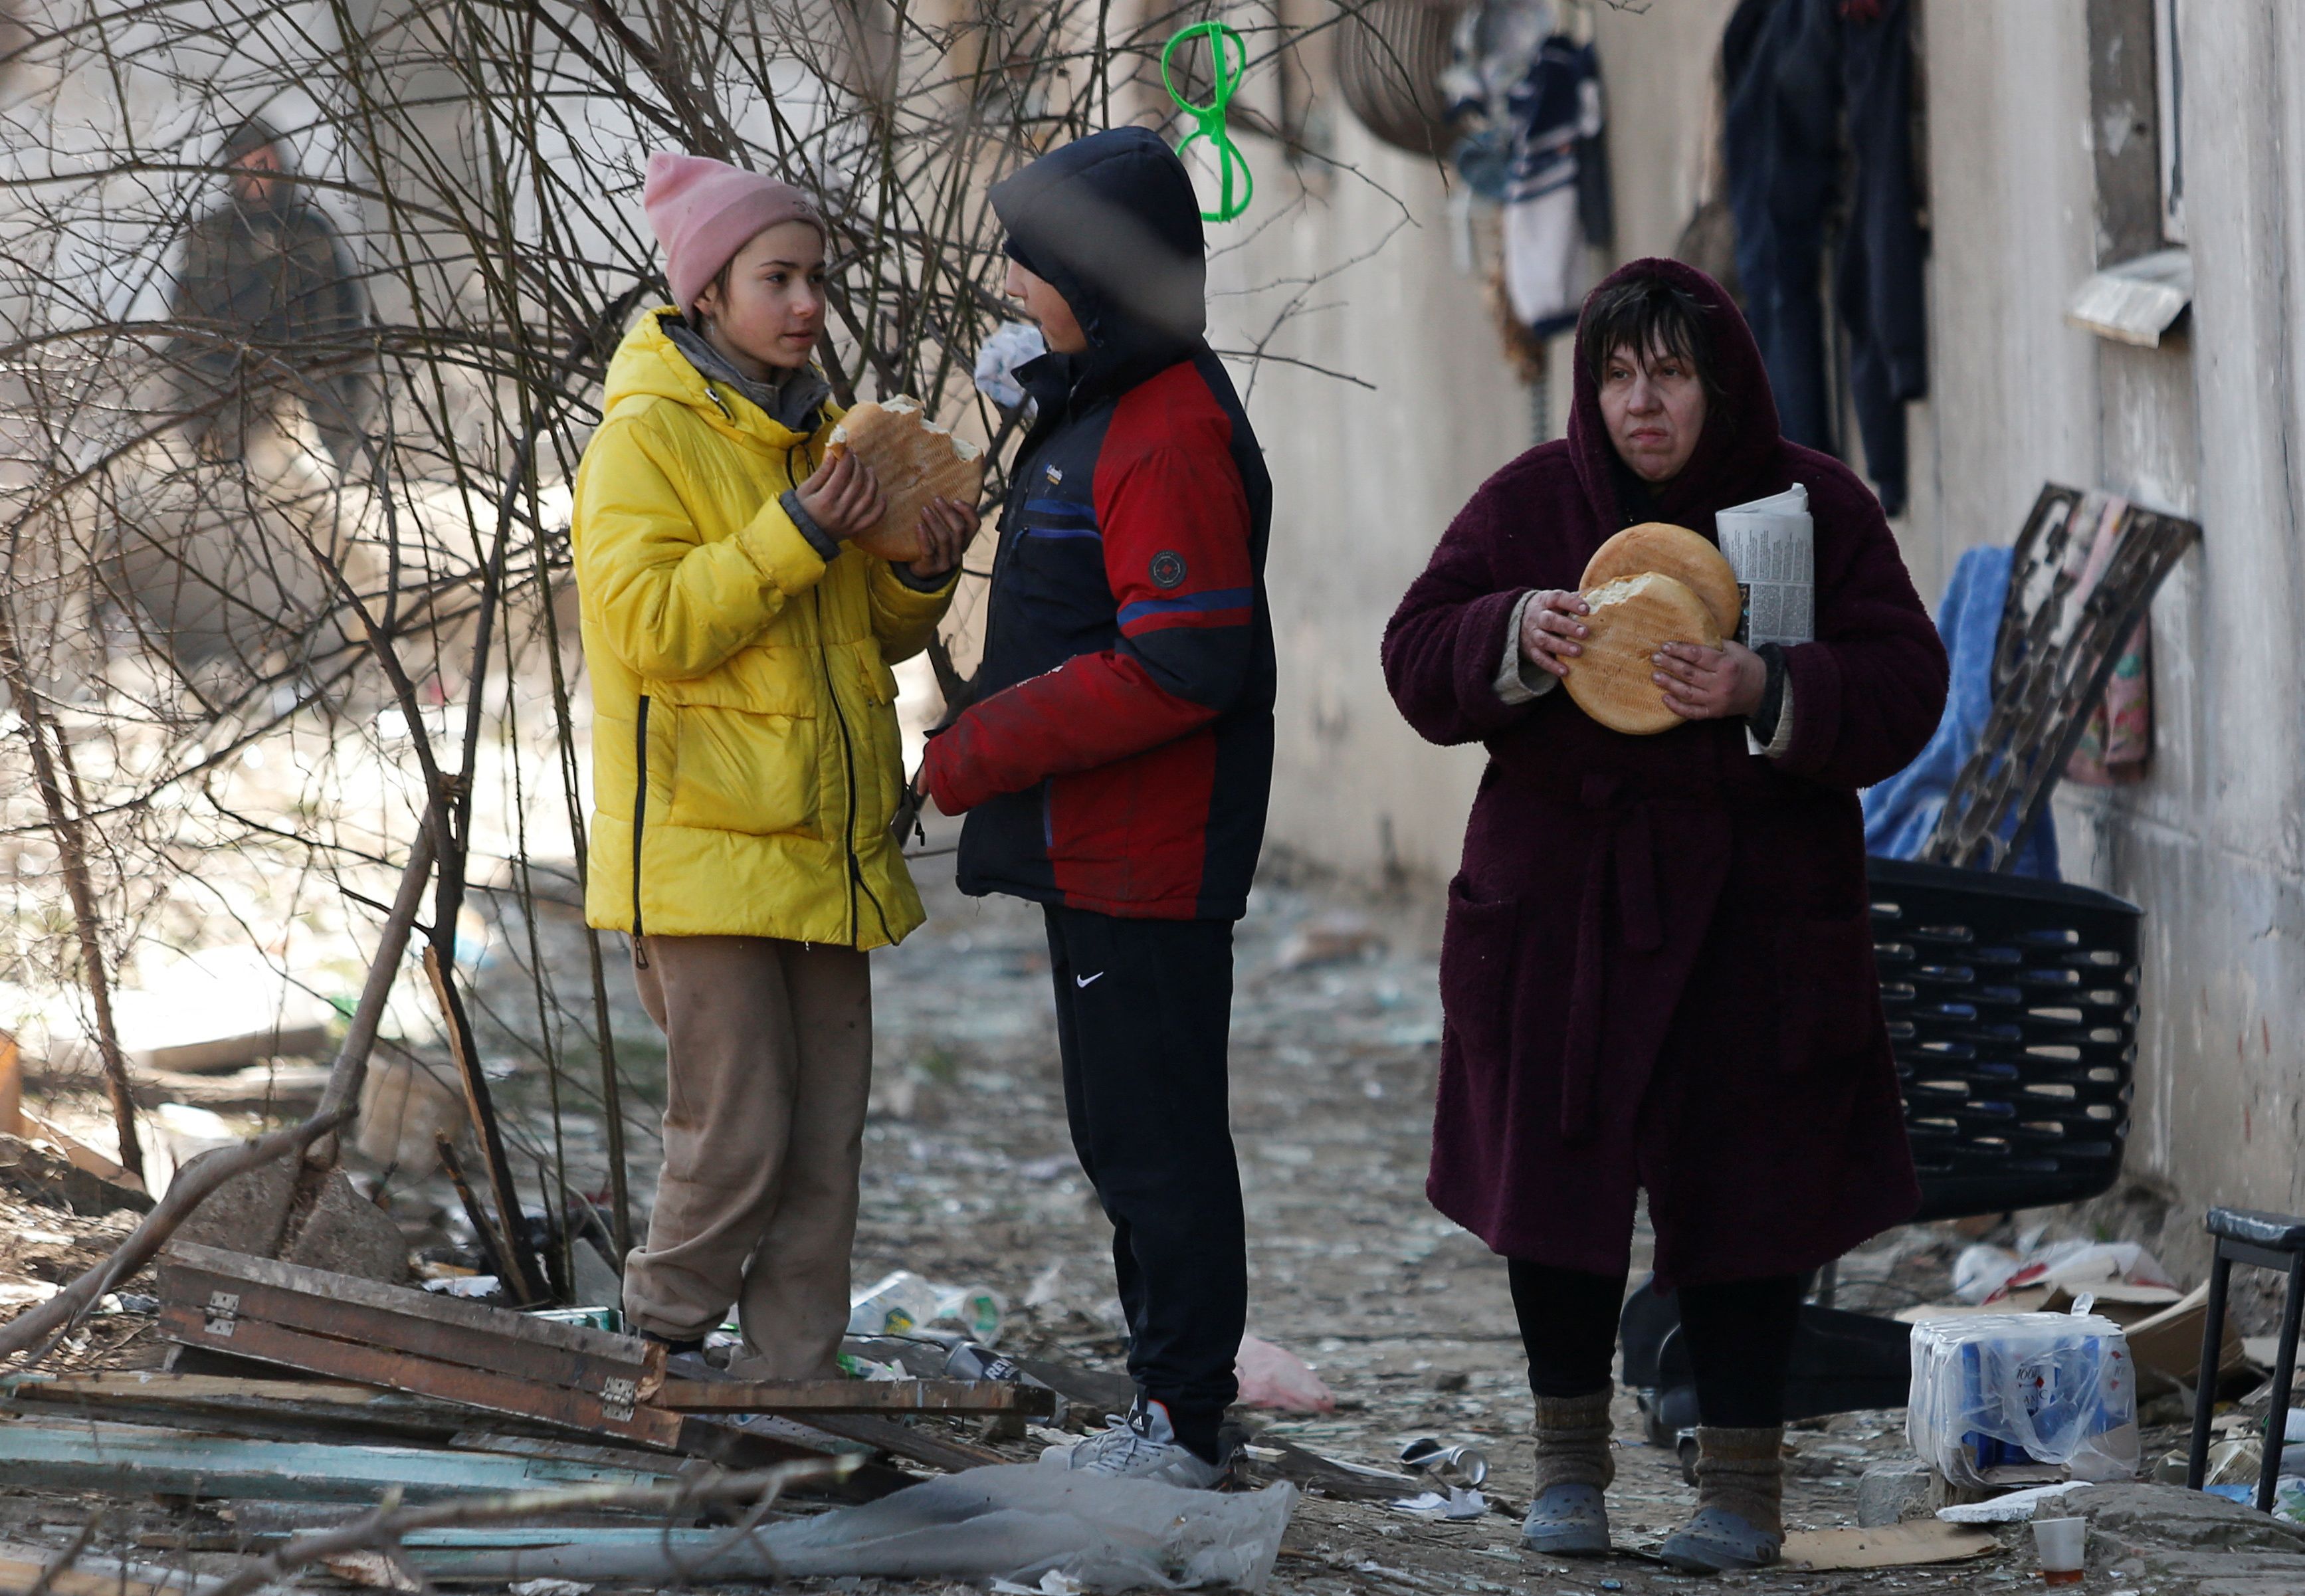 Local residents eat bread outside a building damaged in the course of Ukraine-Russia conflict in the besieged southern port city of Mariupol, Ukraine March 28, 2022. REUTERS/Alexander Ermochenko